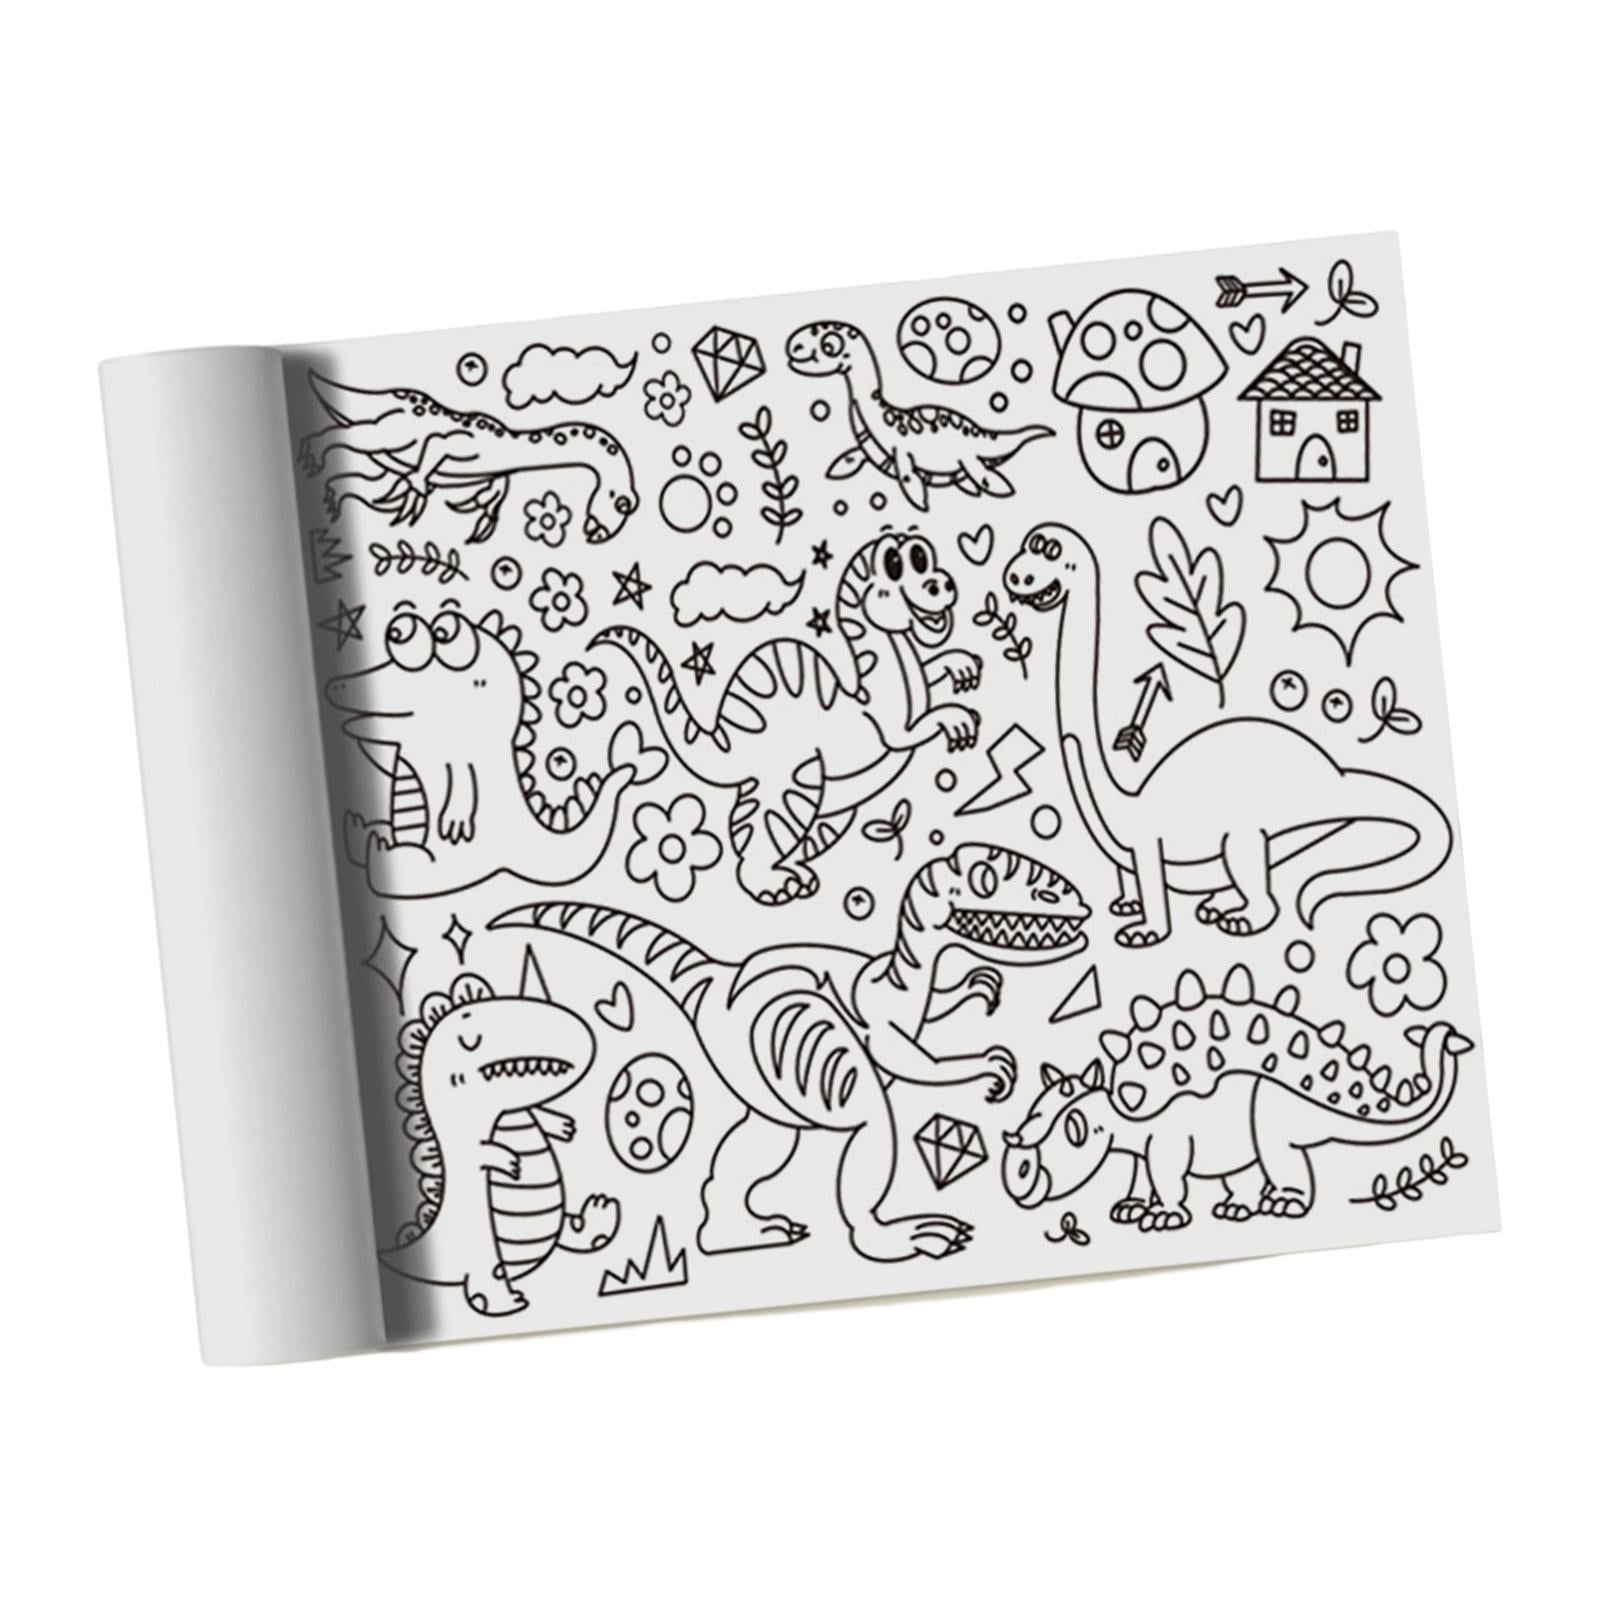 SEWACC 2 Rolls Roll Graffiti Tracing Paper Drawing Color Filling Paper  Coloring Painting Decal DIY Painting Drawing Paper Art Paper for Drawing  and